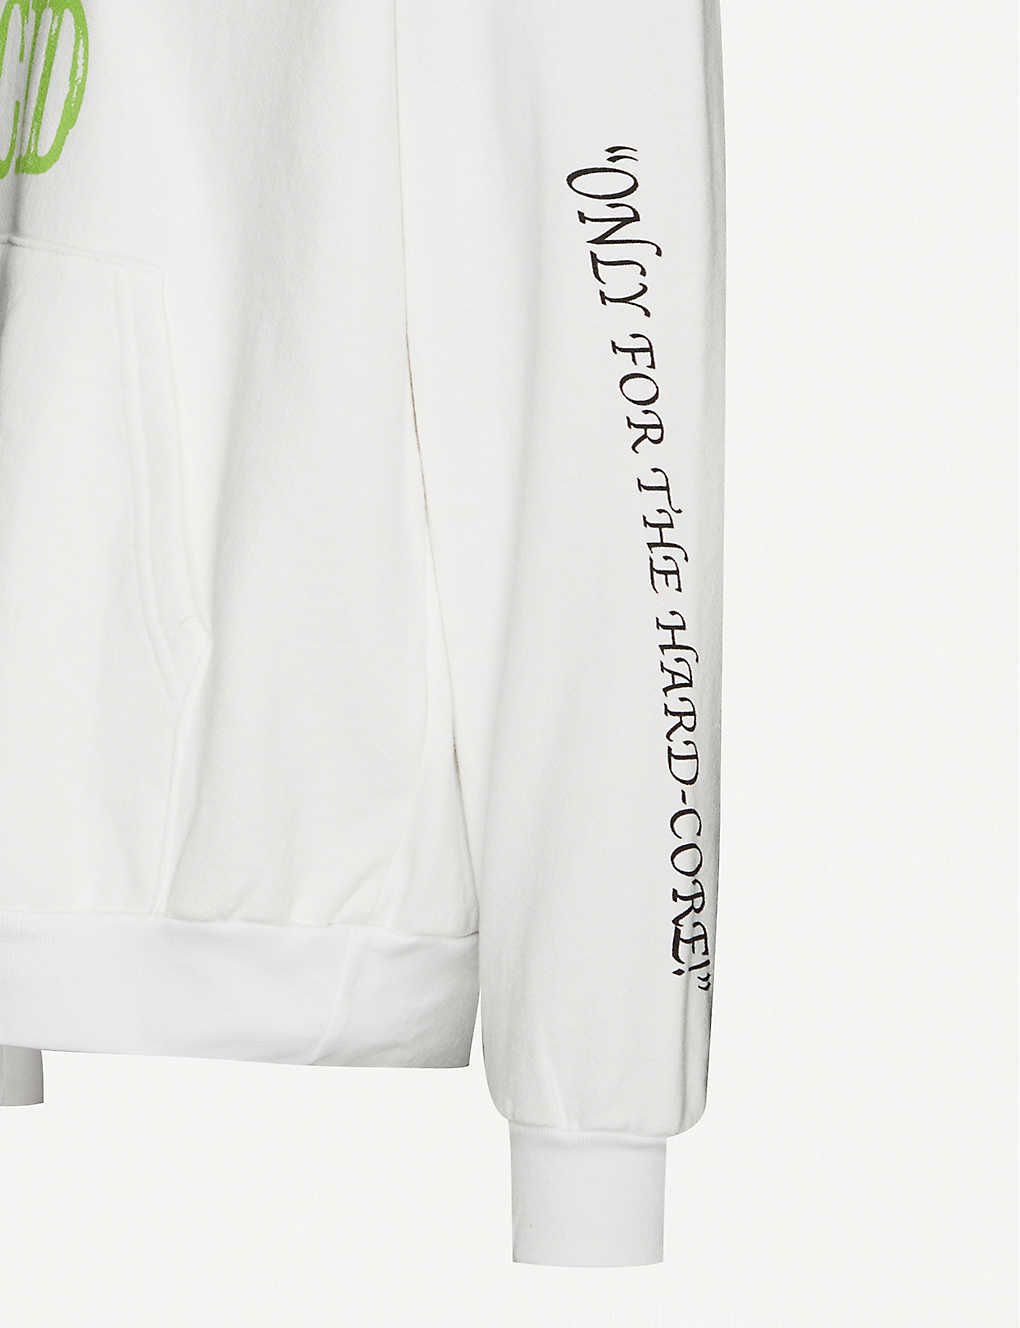 Asap Rocky AWGE Midnight Rave Acid Hoodie Size US S / EU 44-46 / 1 - 3 Preview